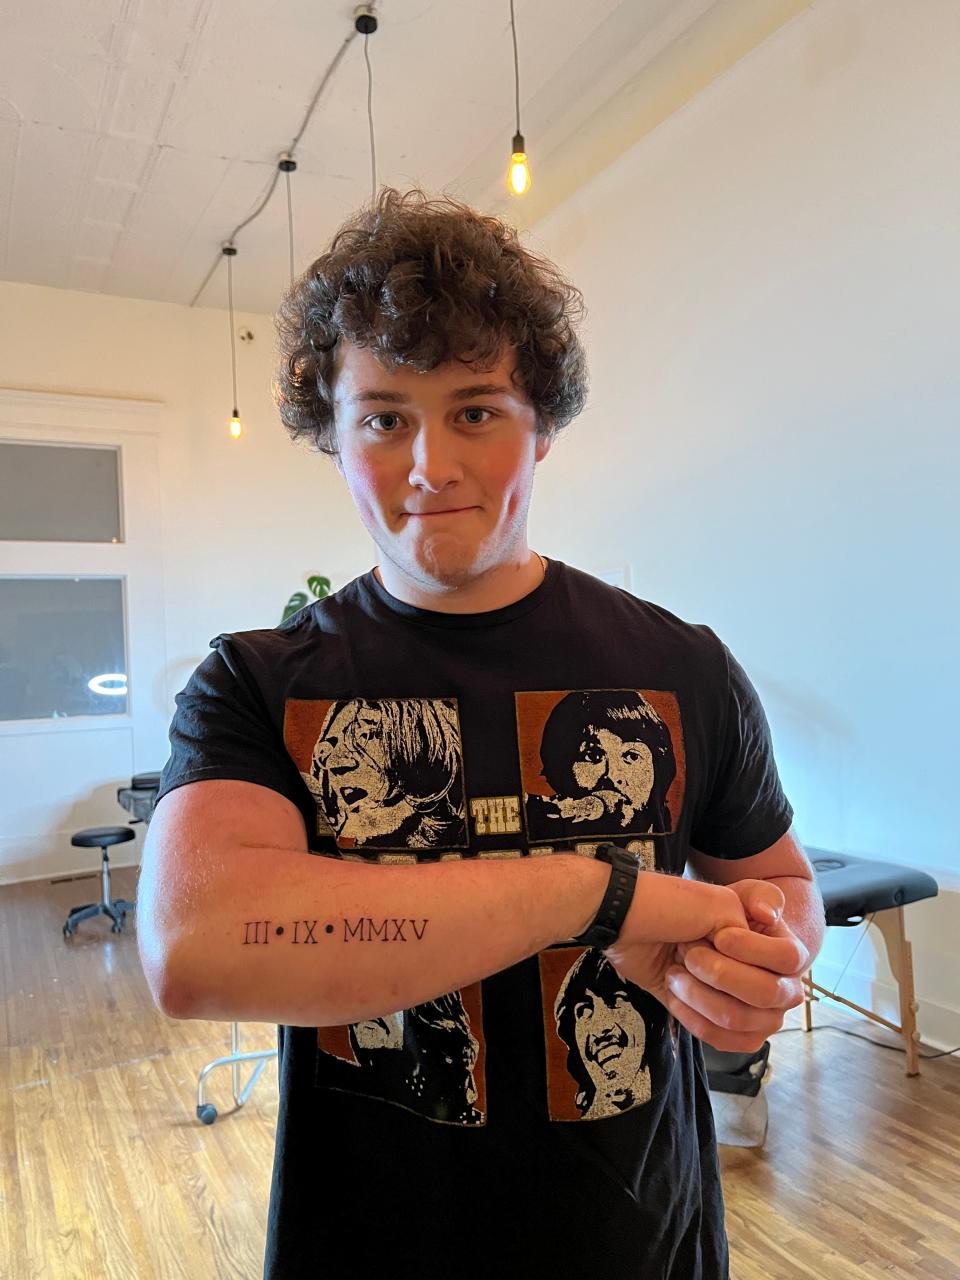 JT shows off his tattoo that he acquired with his sister, Harley.